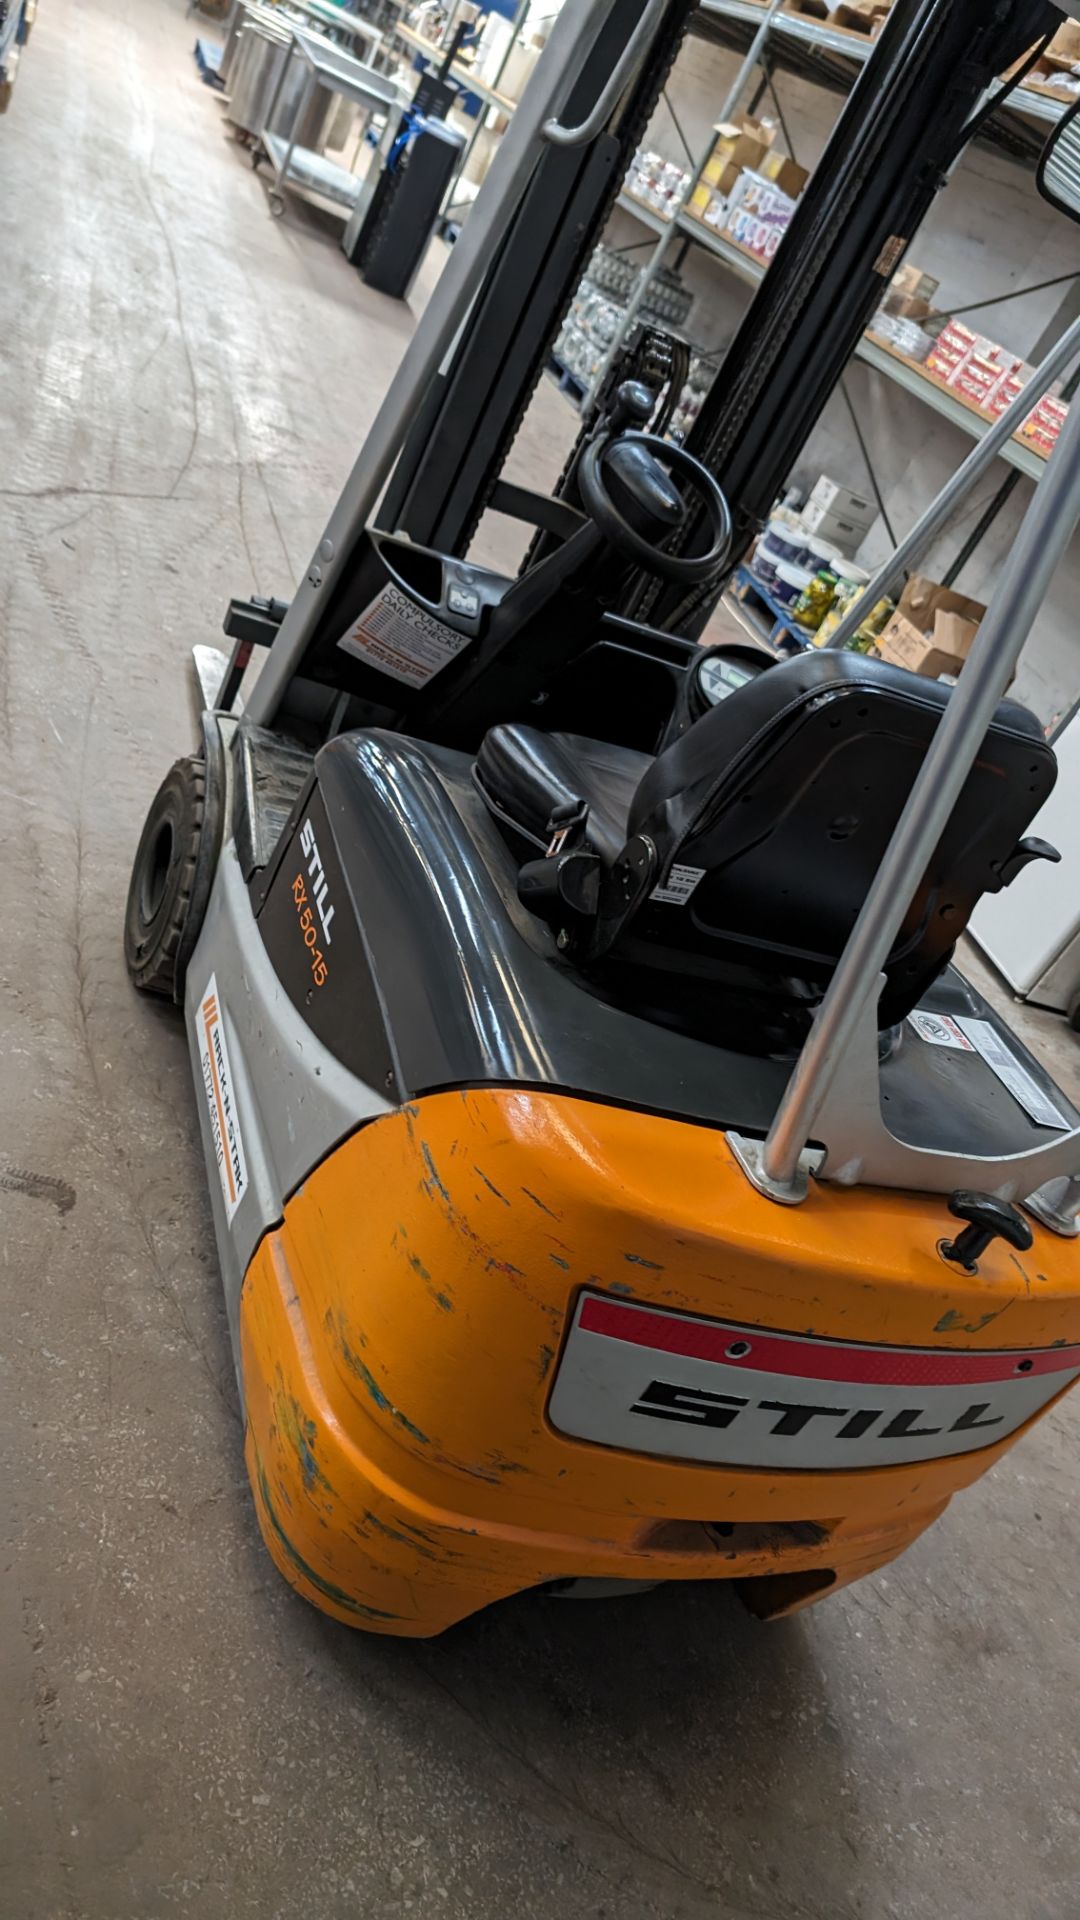 Still model RX-5015 3-wheel electric forklift truck with sideshift, 1.5 tonne capacity, including St - Image 18 of 18